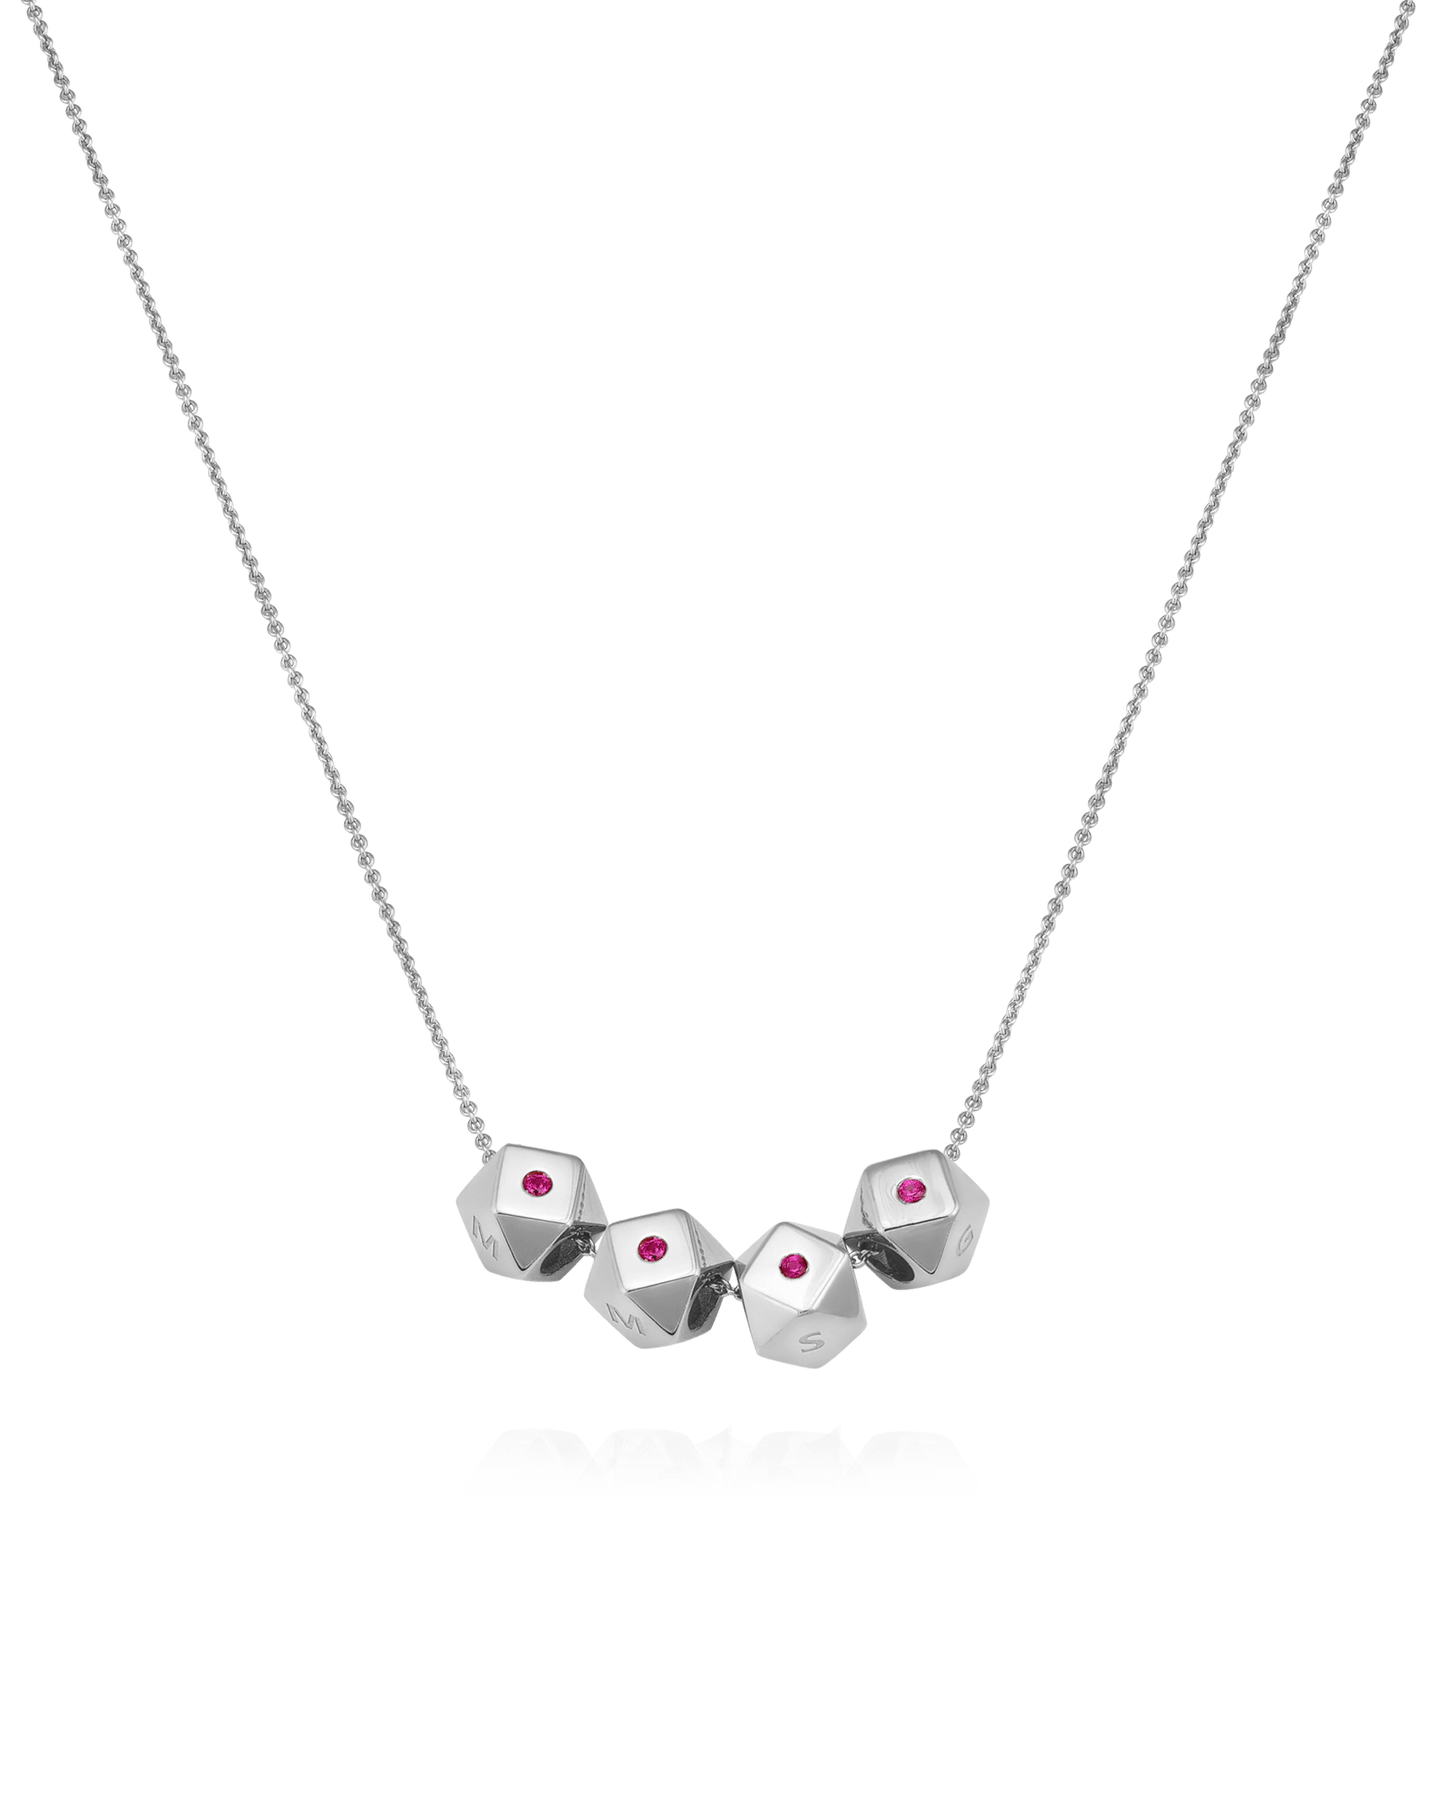 Hedra Necklace - 14K White Gold Necklaces magal-dev 4 Charms 16”+2” extender 